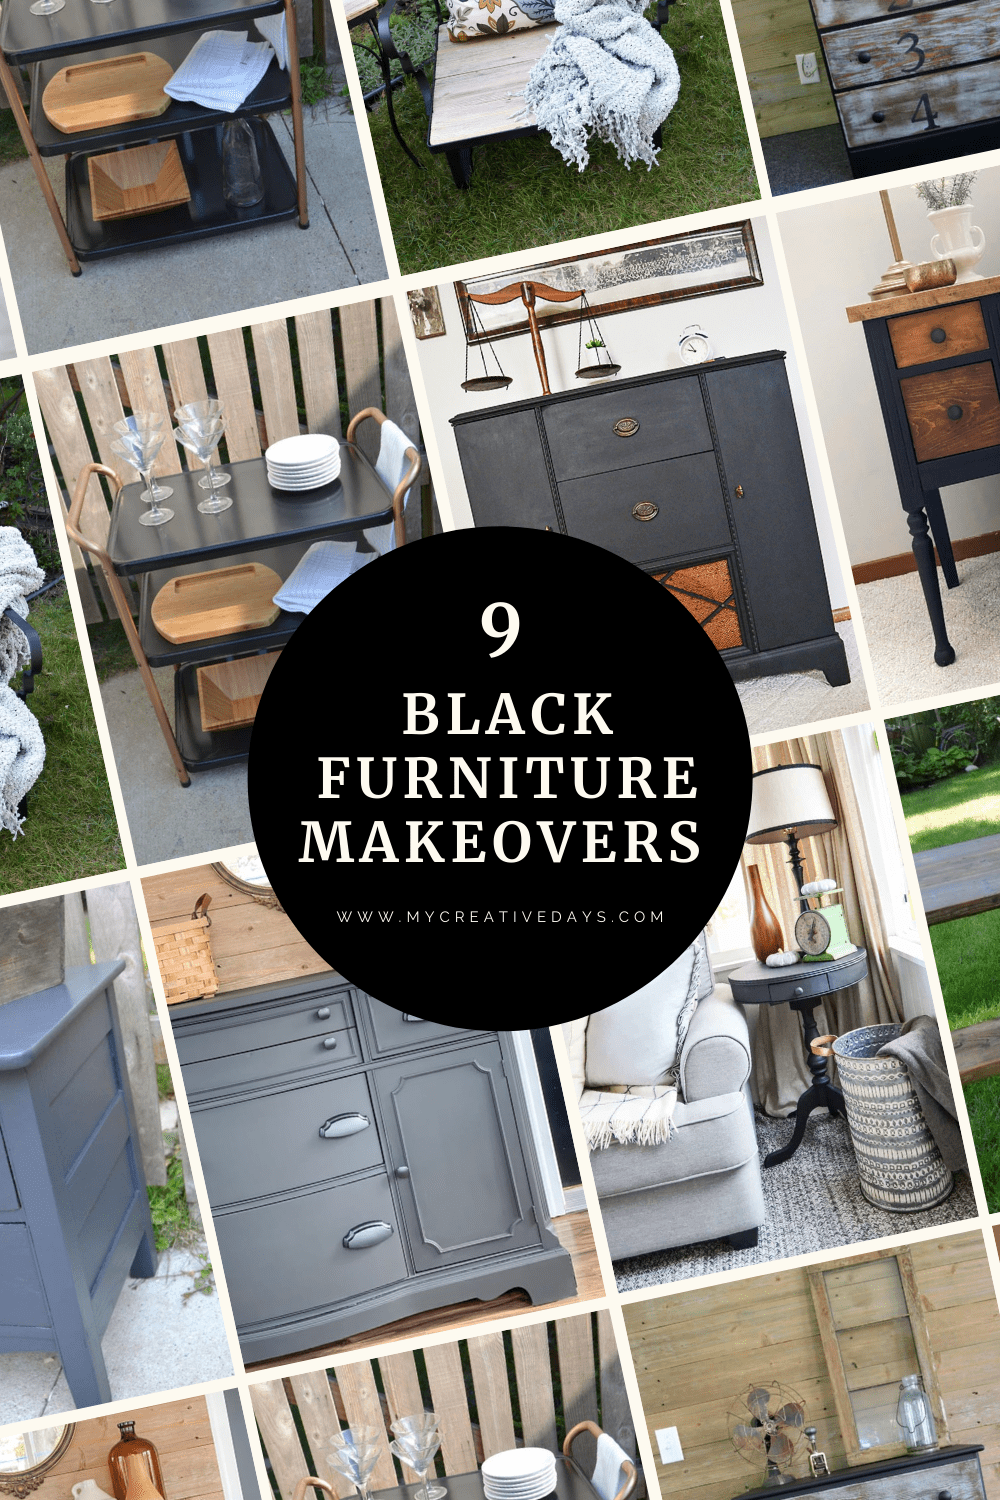 Black furniture will anchor a room and add a ton of sophistication. These black furniture makeovers are sure to inspire your next project.